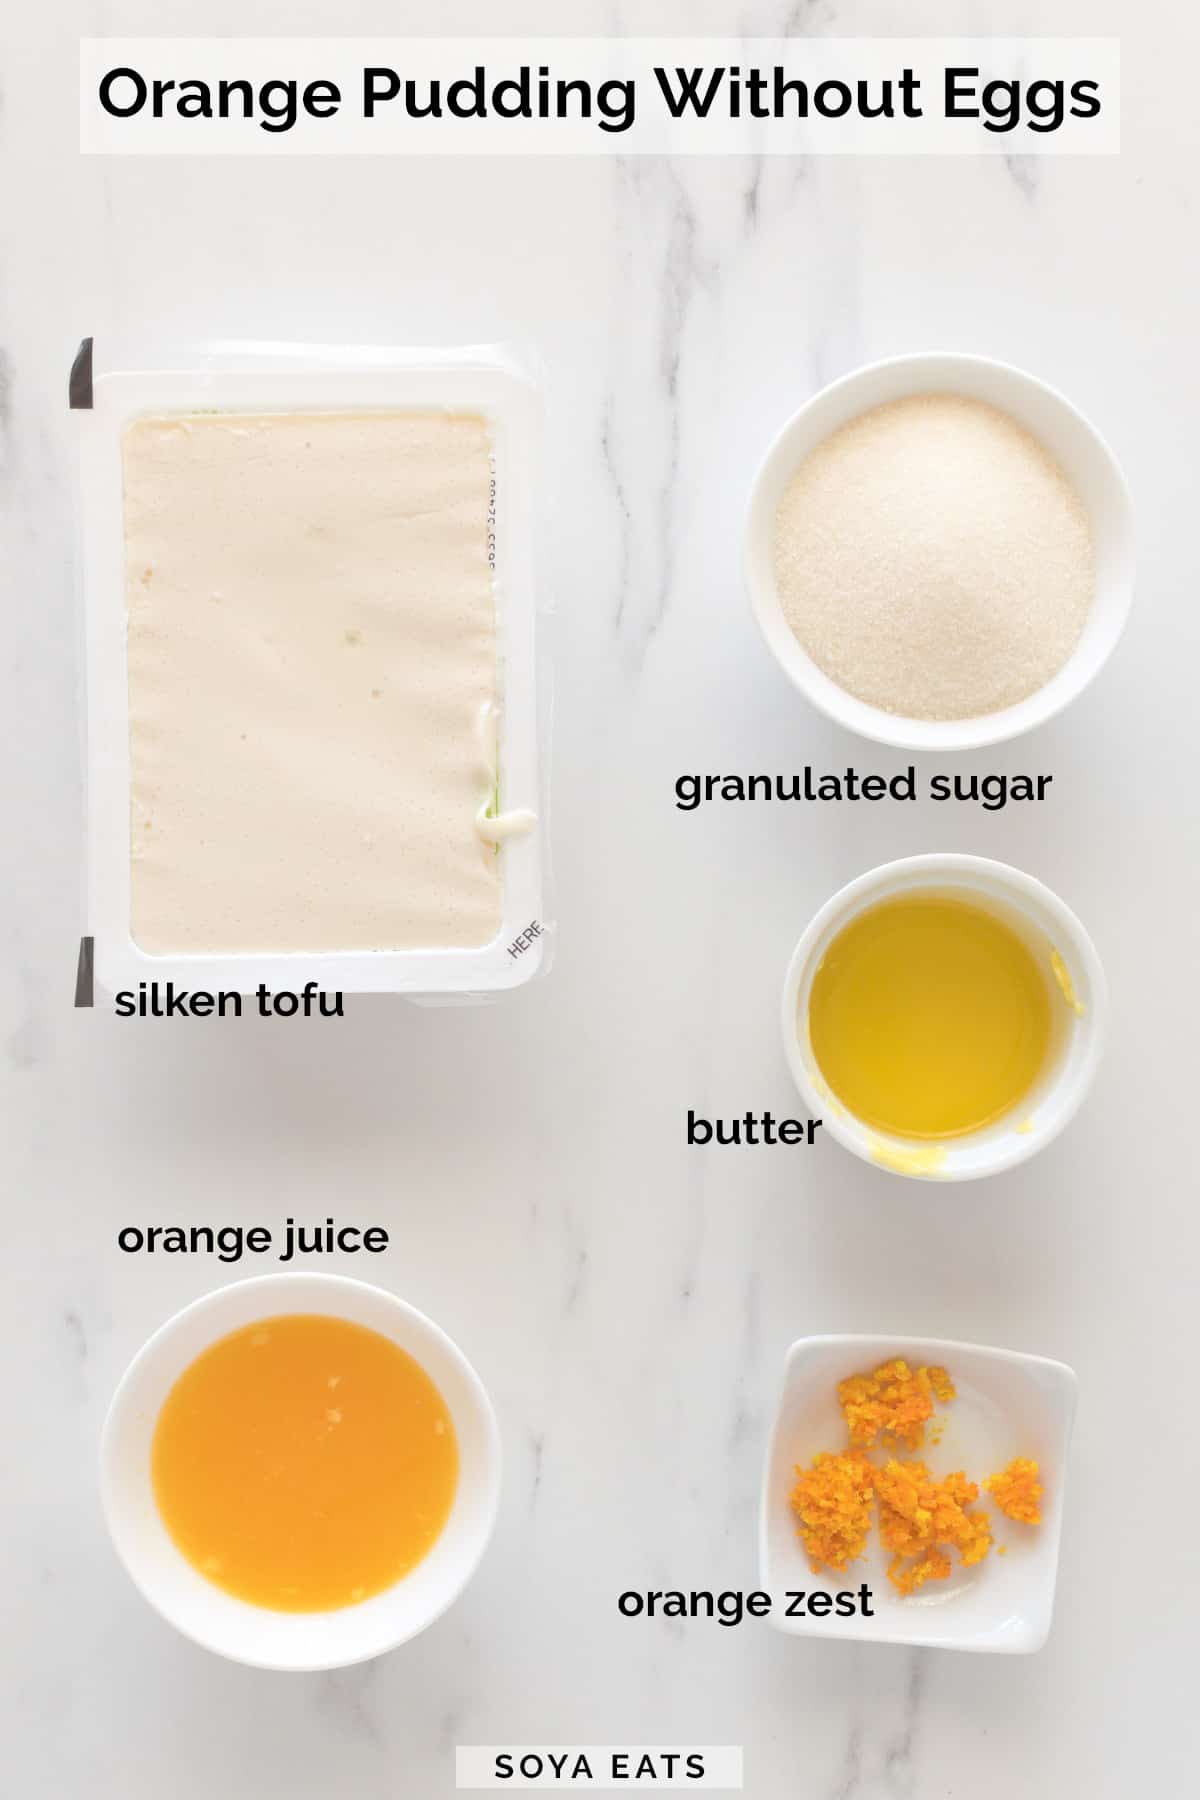 Ingredients image for orange pudding without eggs.